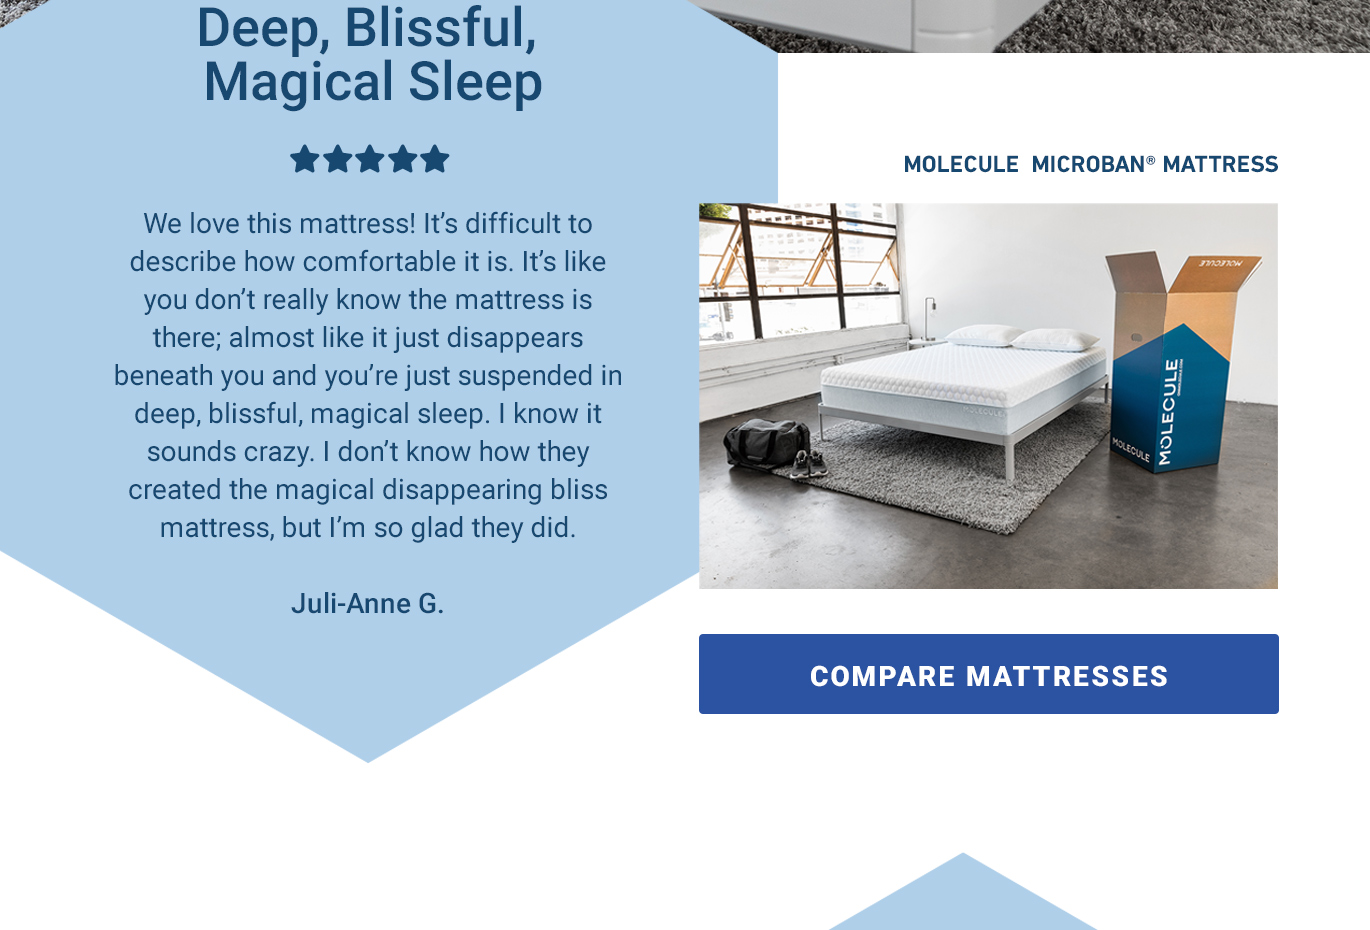 We love this mattress! It's like you don't really know the mattress is there; almost like it just disappears beneath you and you're just suspended in deep, blissful, magical sleep. I know it sounds crazy. I don't know how they created the magical mattress, but I'm so glad they did. - Juli-Anne G. [COMPARE MATTRESSES]